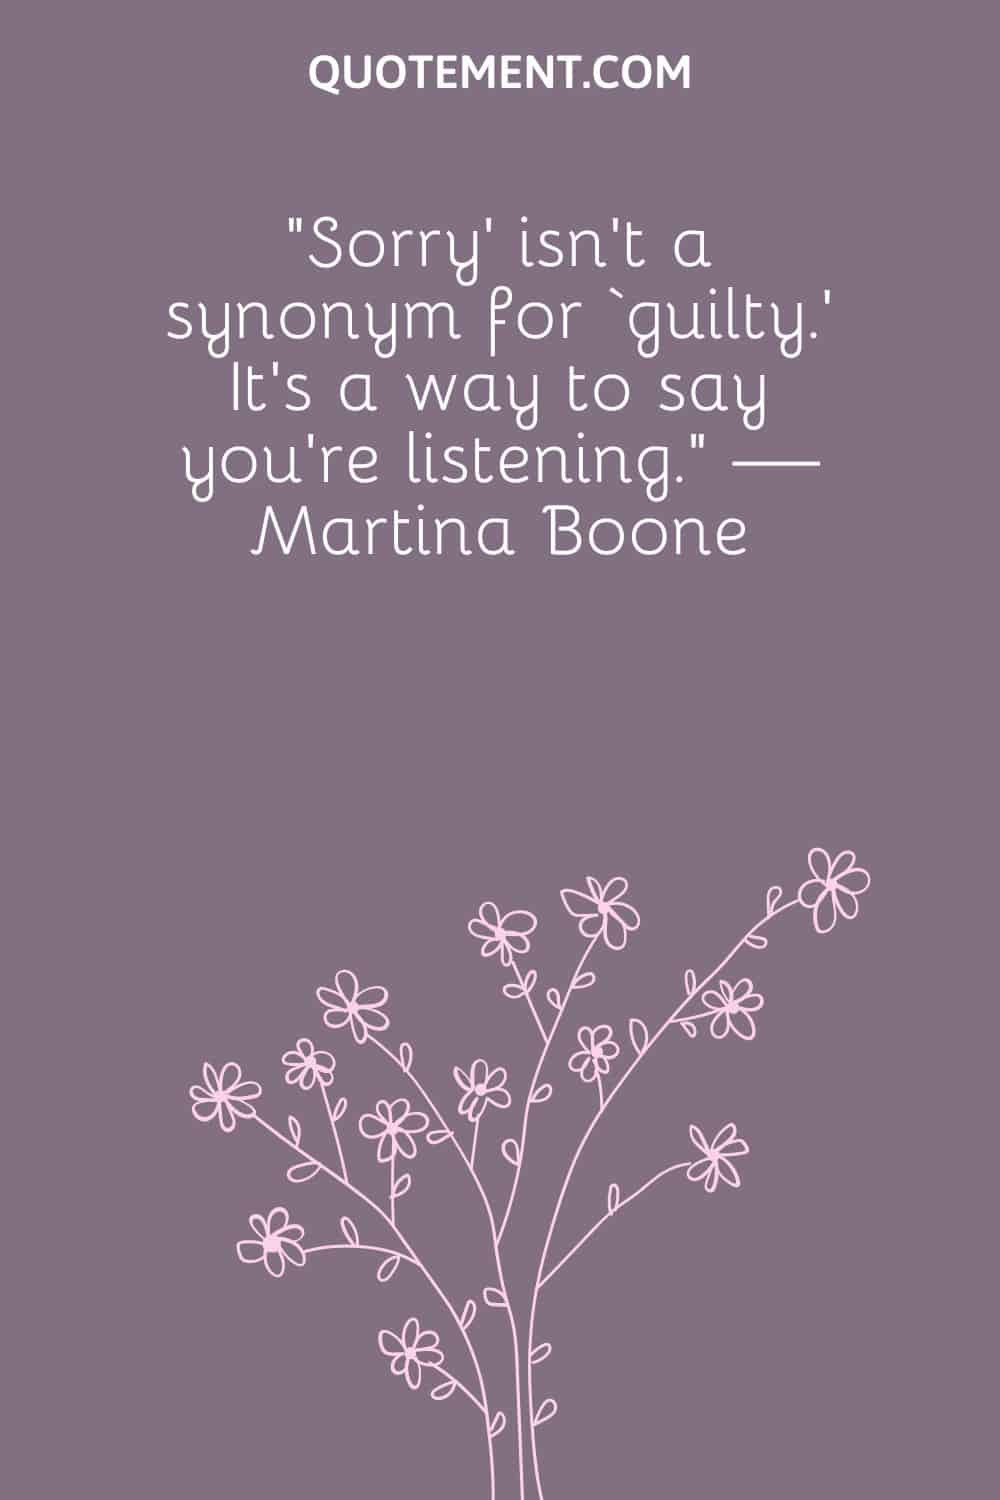 “Sorry’ isn’t a synonym for ‘guilty.’ It’s a way to say you’re listening.“ — Martina Boone